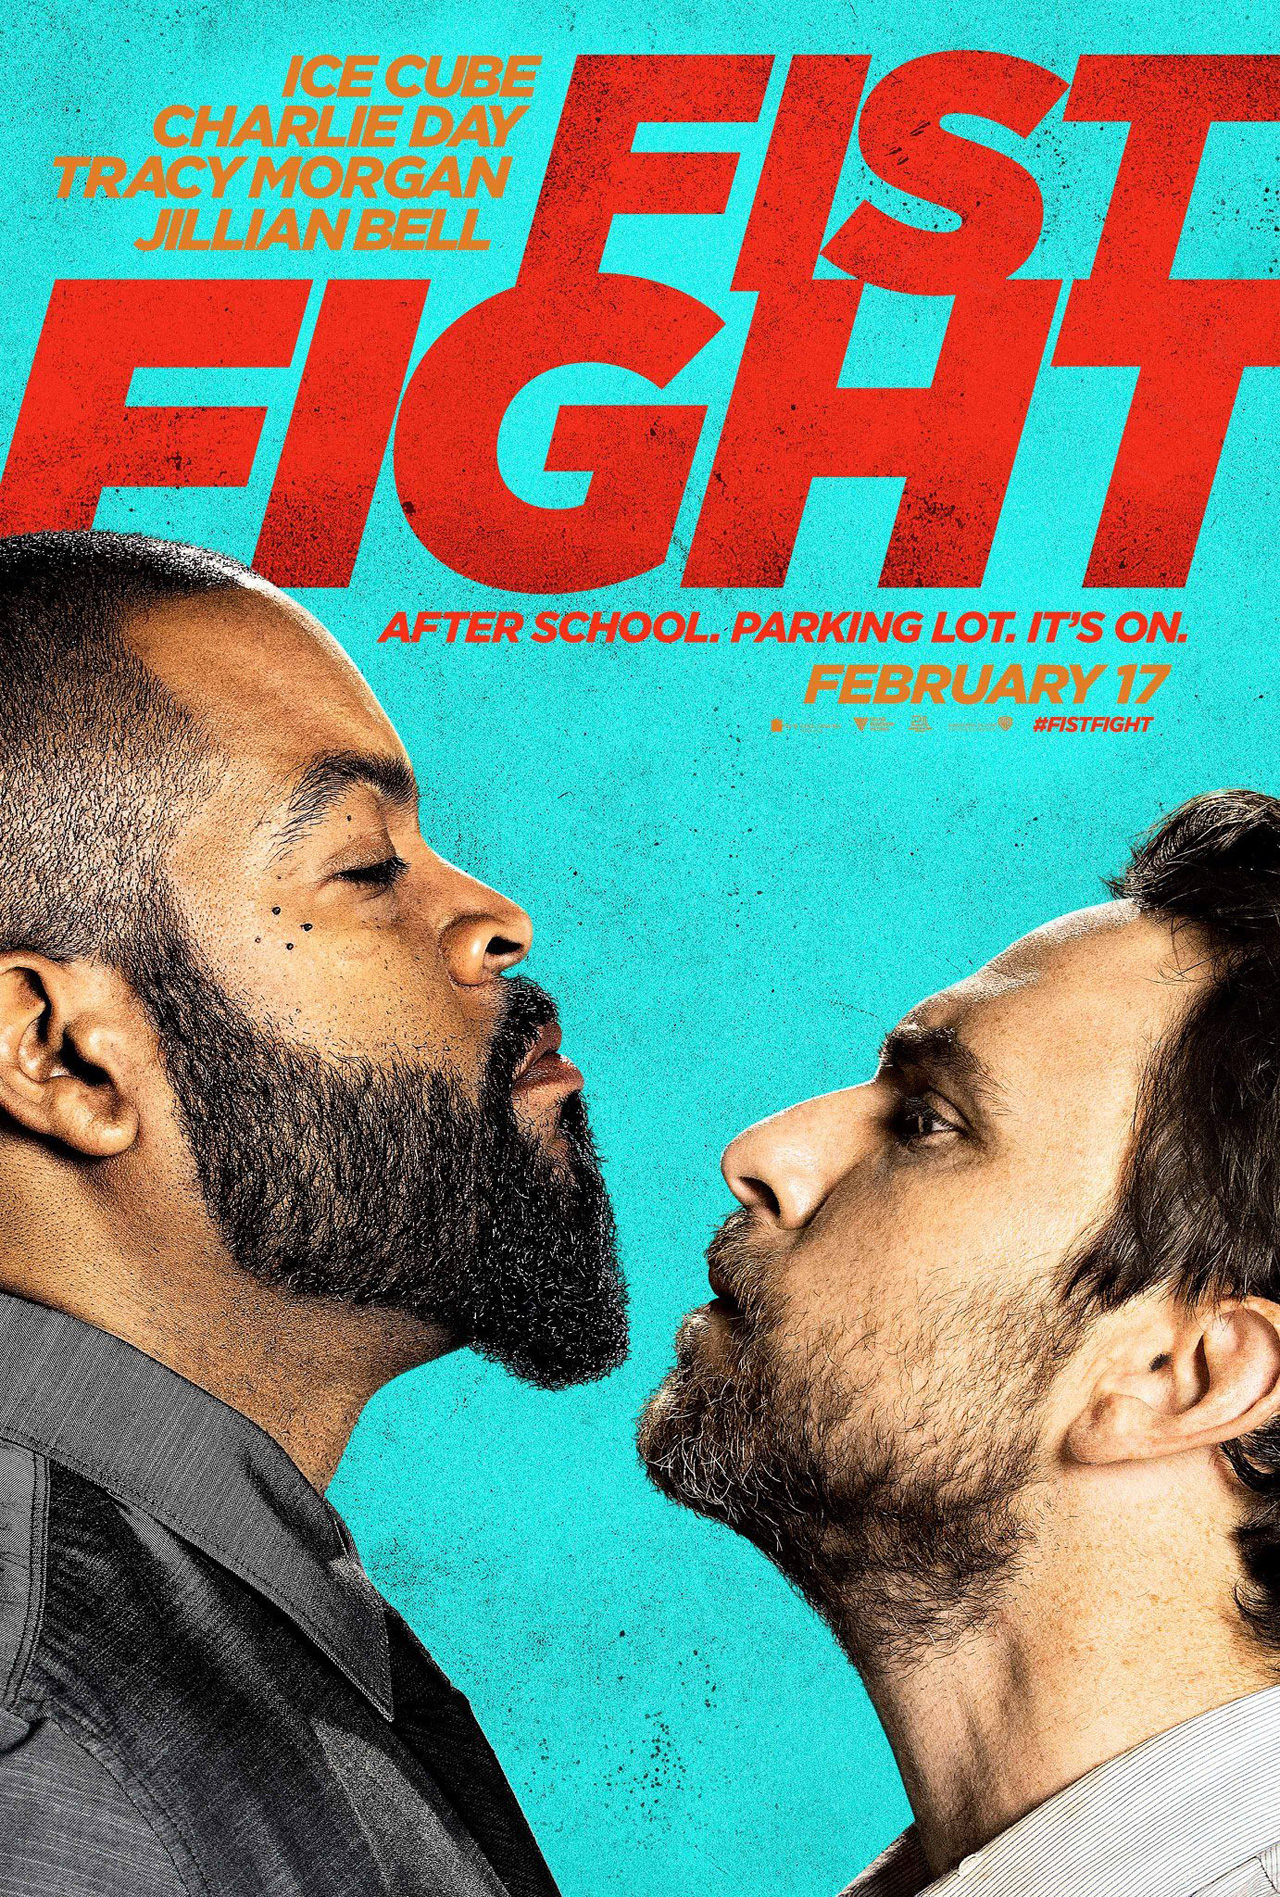 Read more about the article Fist Fight Review